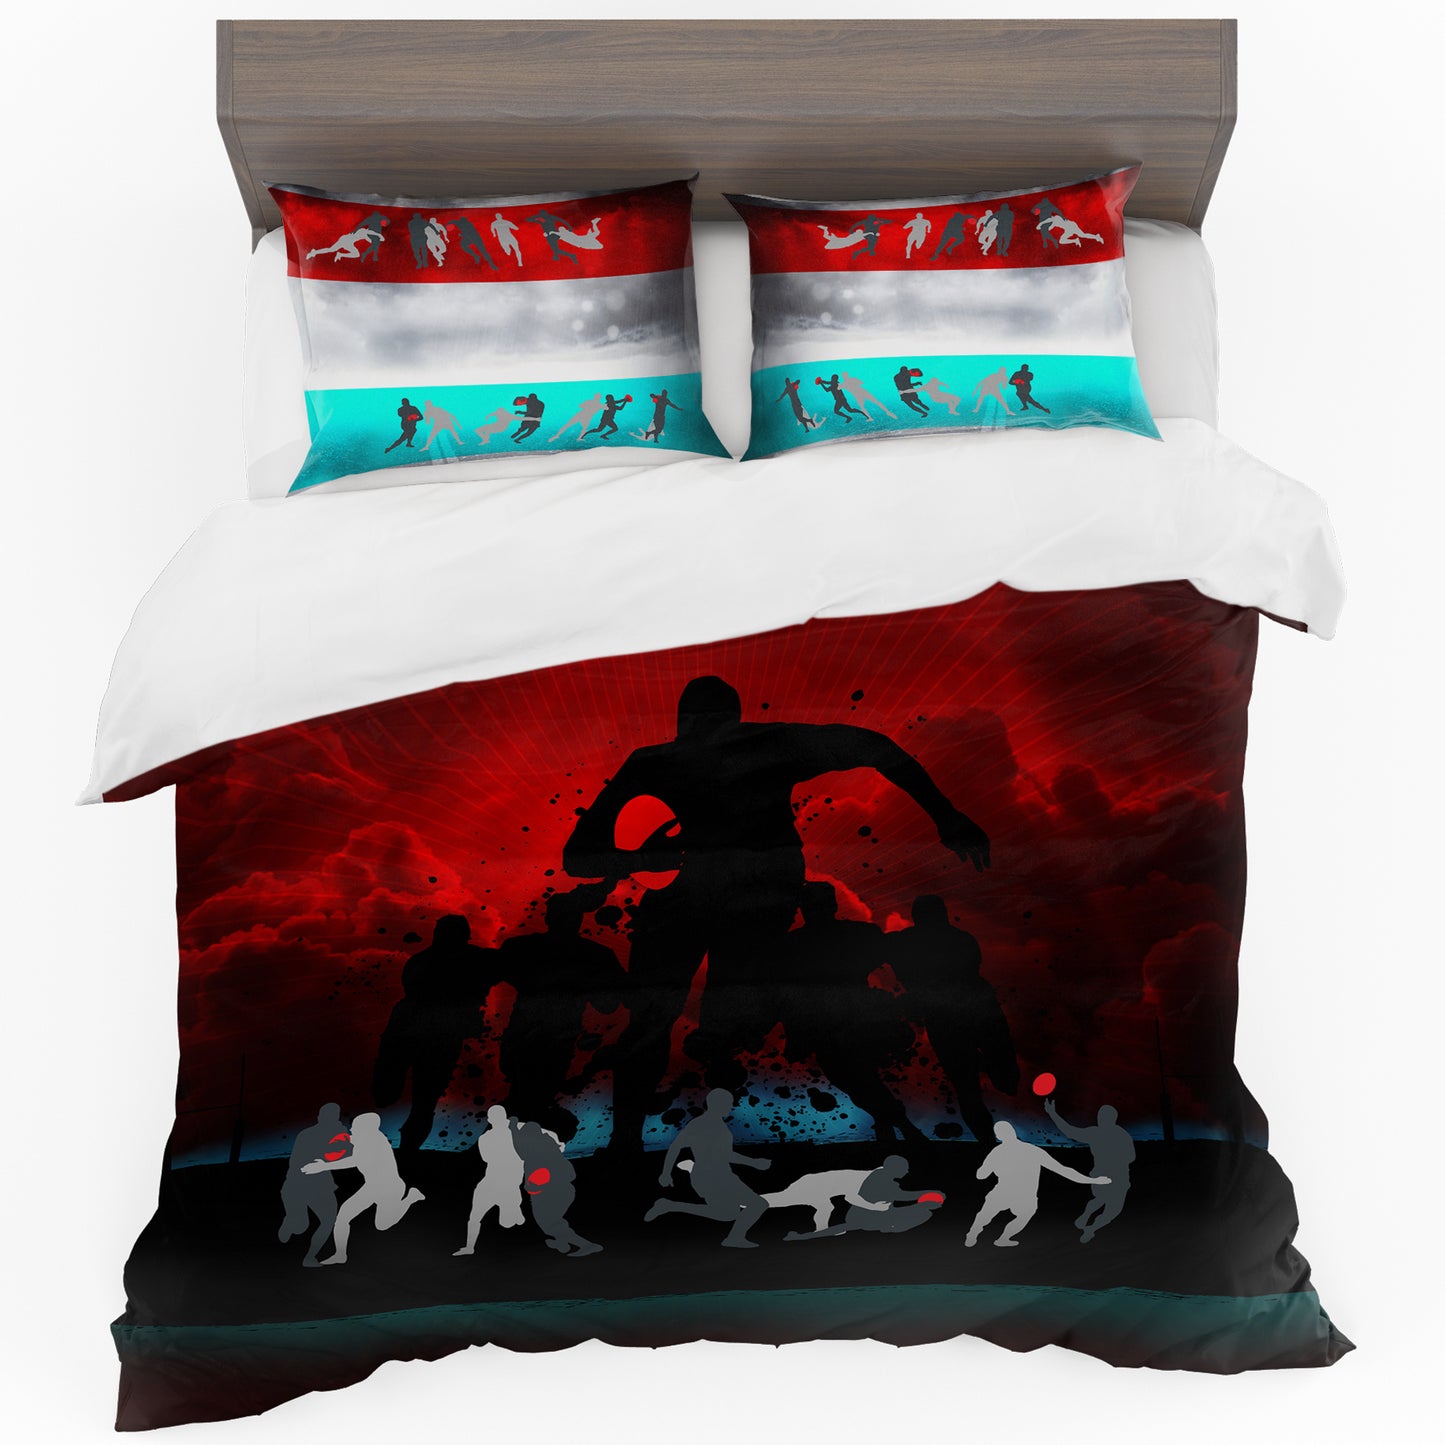 SPECIAL: Rugby Duvet Cover Set - Double